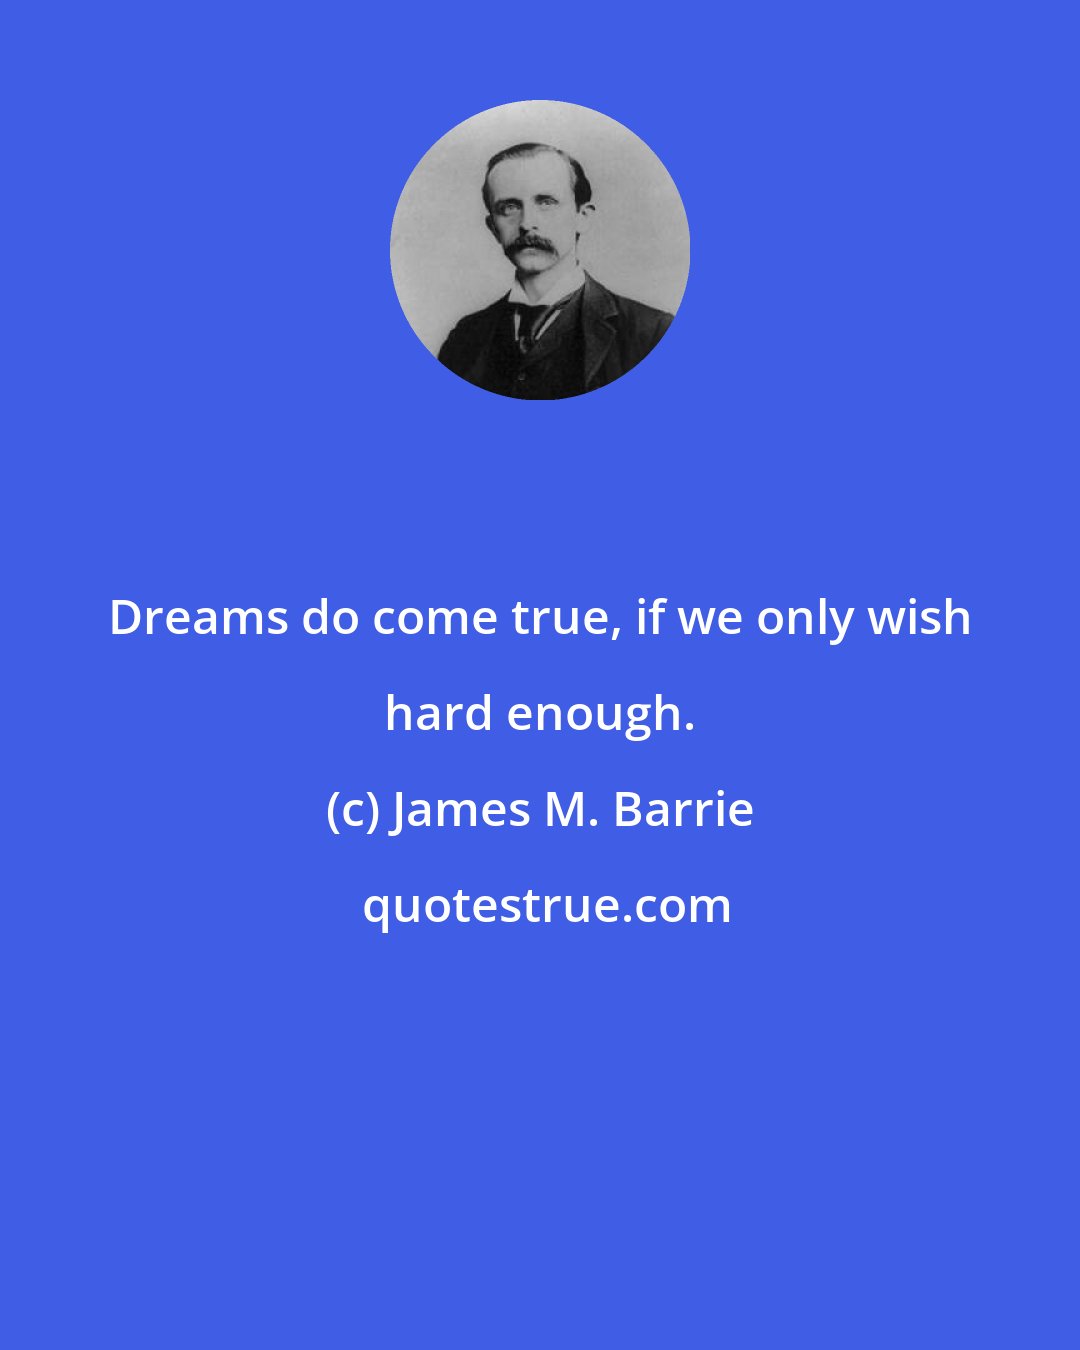 James M. Barrie: Dreams do come true, if we only wish hard enough.